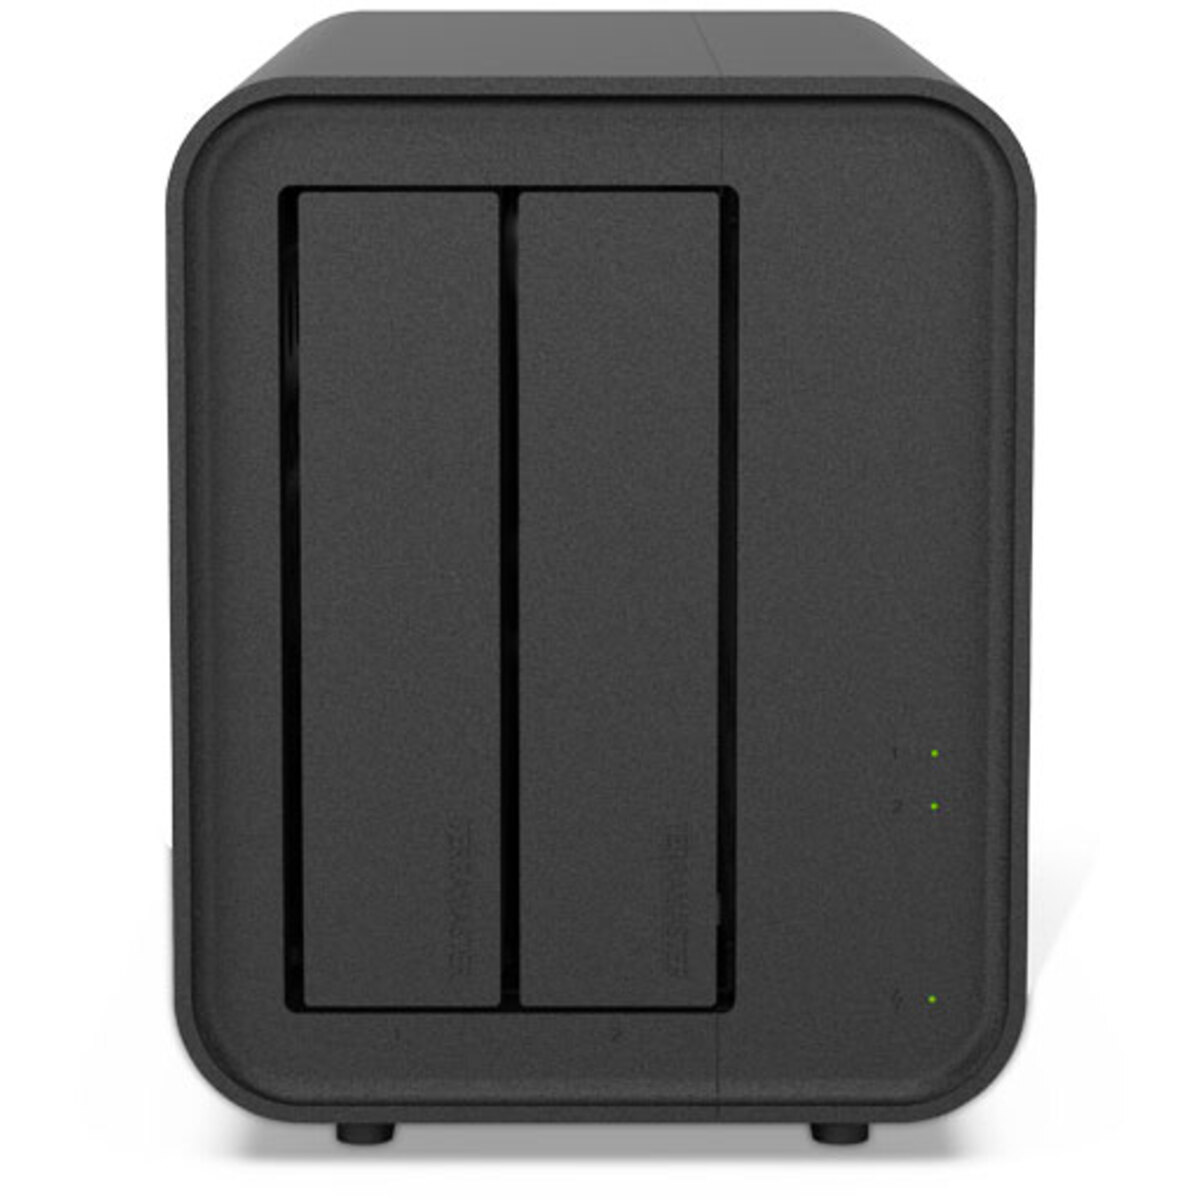 TerraMaster F2-424 12tb 2-Bay Desktop Multimedia / Power User / Business NAS - Network Attached Storage Device 1x12tb Seagate IronWolf Pro ST12000NT001 3.5 7200rpm SATA 6Gb/s HDD NAS Class Drives Installed - Burn-In Tested - ON SALE F2-424